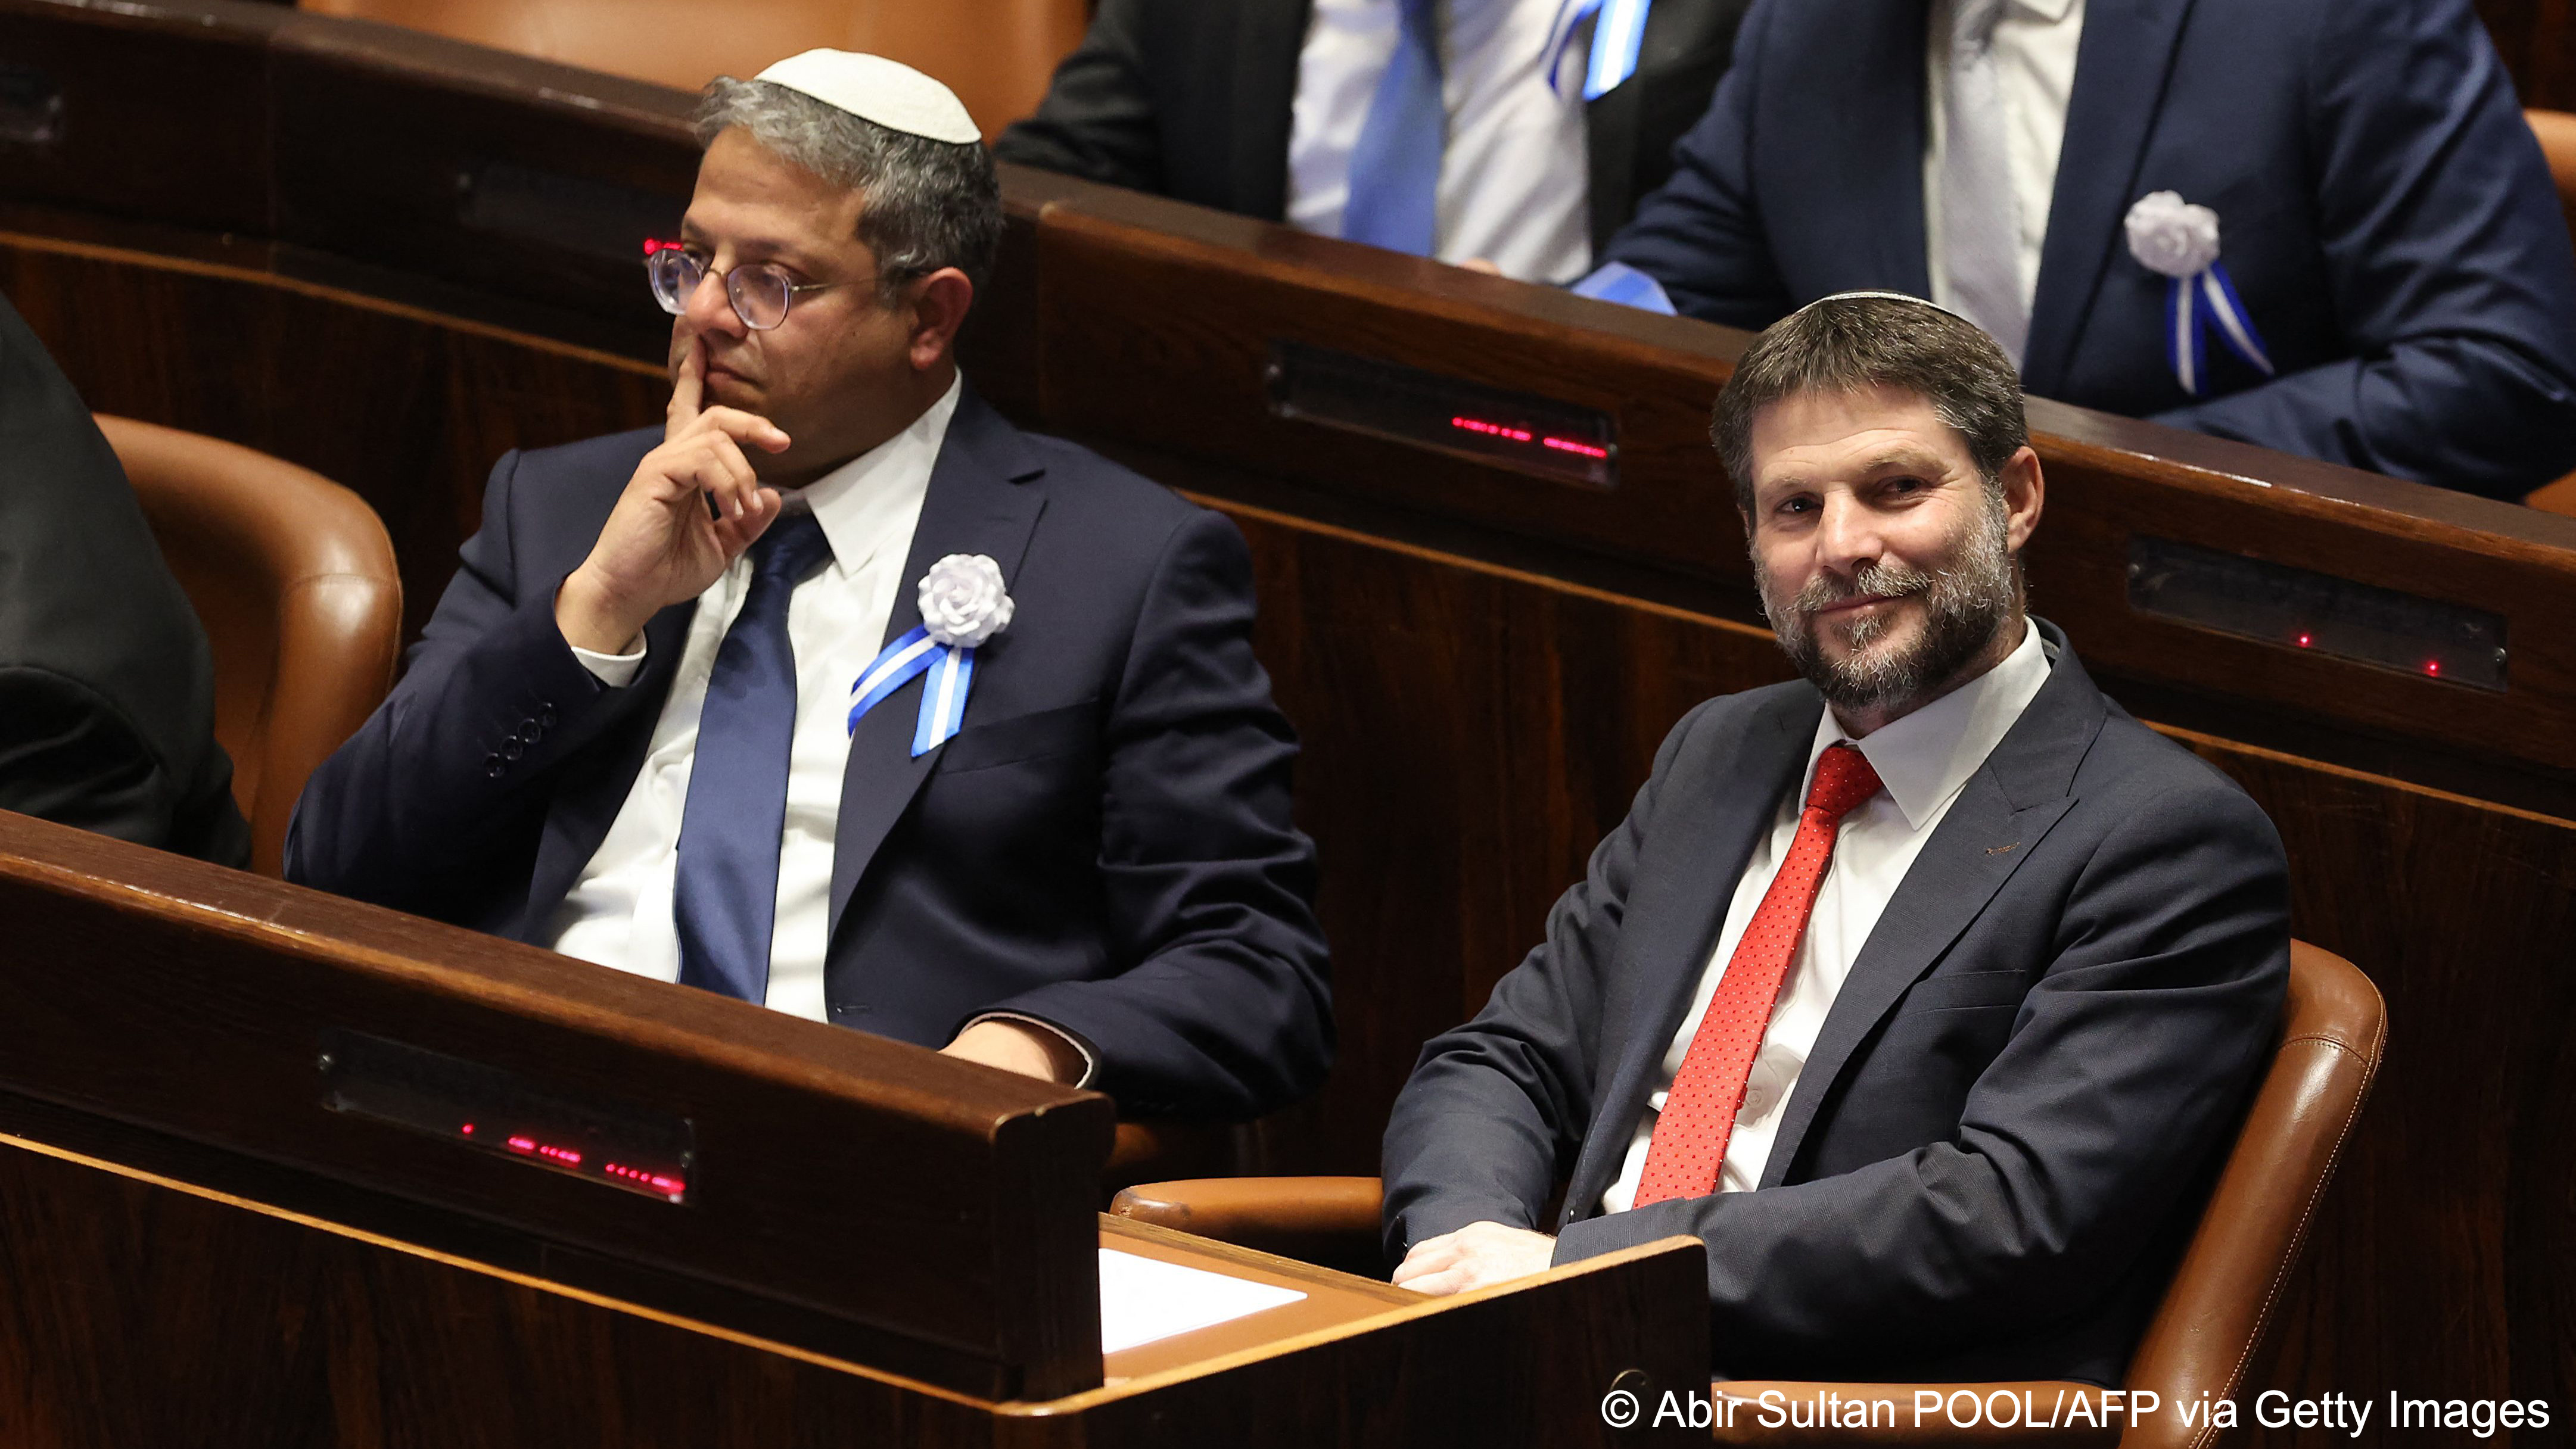 Israeli right wing Knesset member Itamar Ben Gvir (left) and Bezalel Smotrich (right) are pictured during the swearing-in ceremony of the new Israeli government at the Knesset (Israeli parliament) in Jerusalem, Israel, 15 November 2022